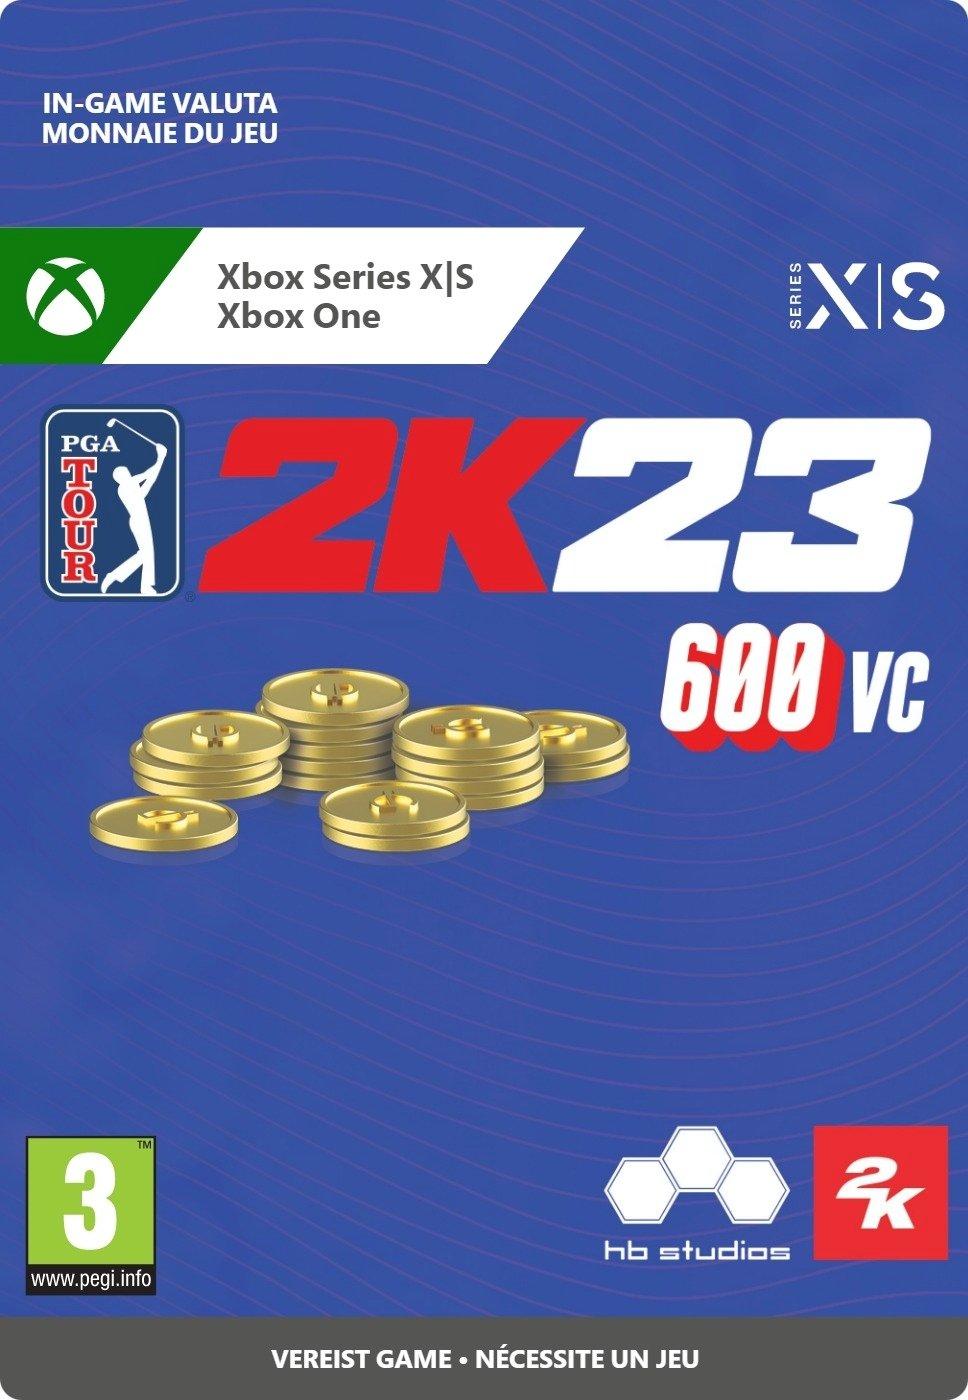 PGA Tour 2K23 - 600 VC Pack - Xbox Series X/Xbox One - Currency | 7F6-00499 (44984d6a-84b1-ee4c-a015-9229538fb9c4)